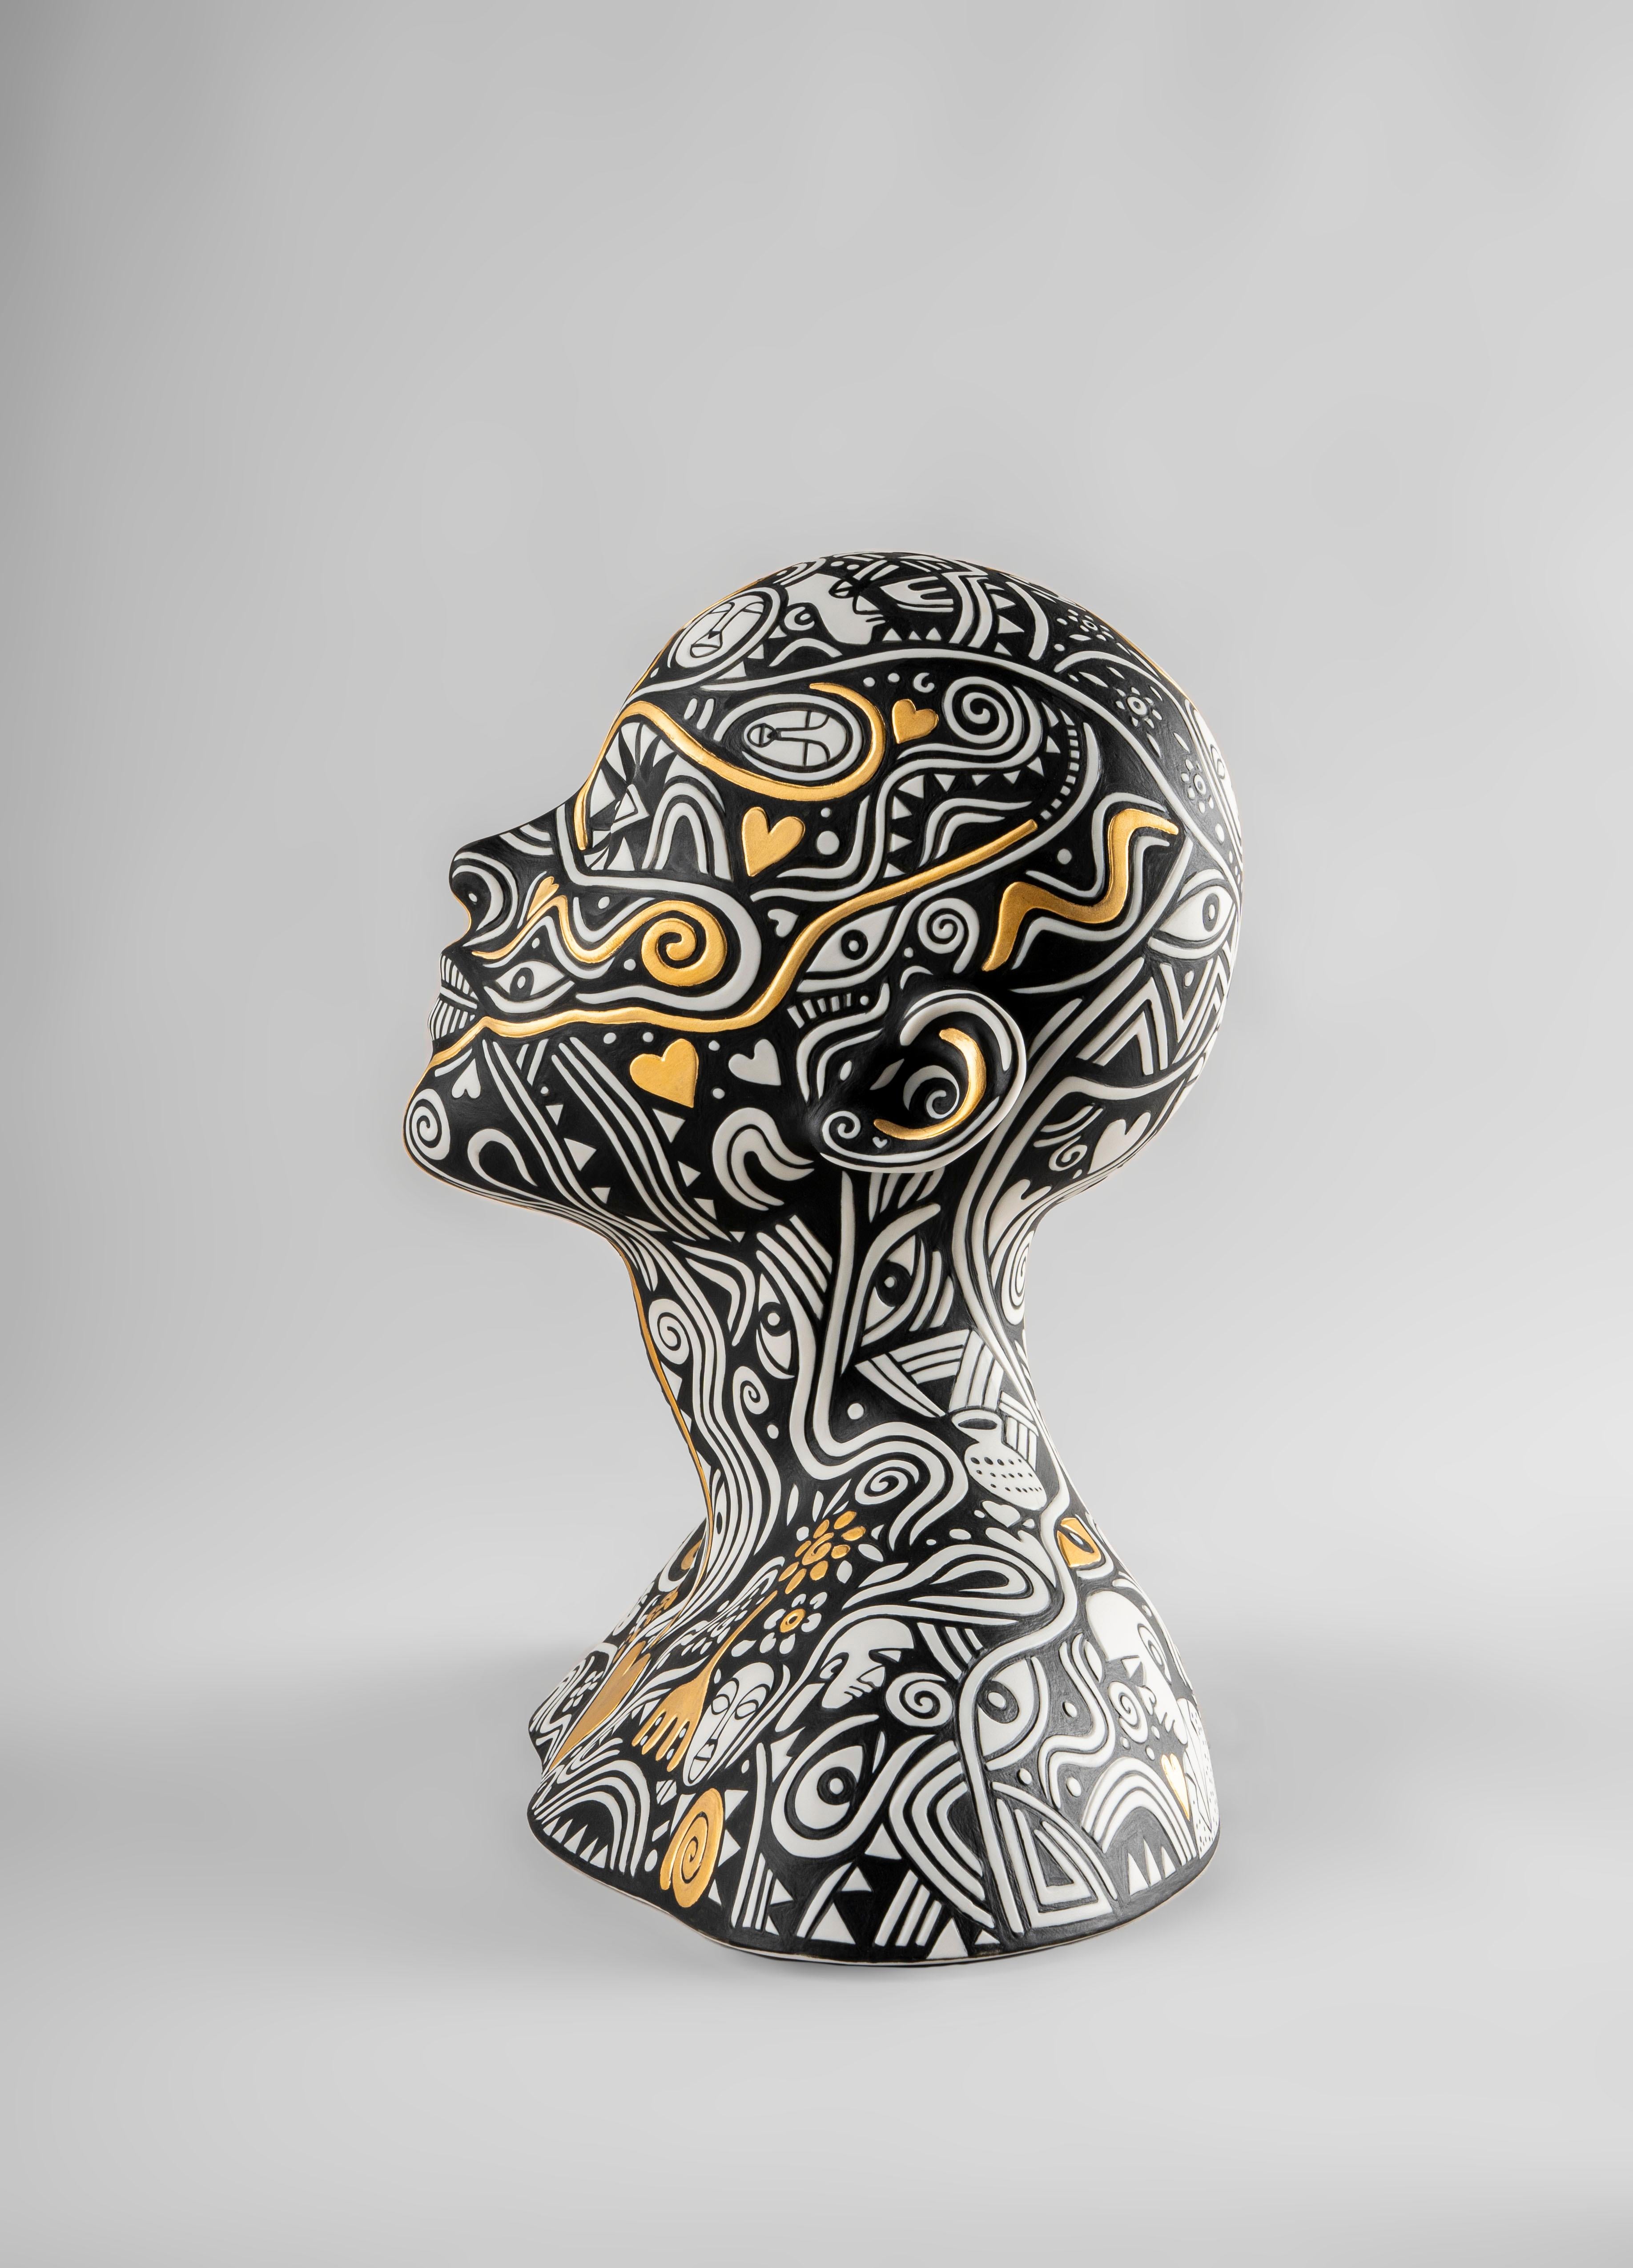 Porcelain sculpture made in collaboration with the Nigerian artist Laolu. A conceptual creation with the personal stamp of a committed artist. This porcelain sculpture decorated with a compelling combination of white, black and golden luster is the